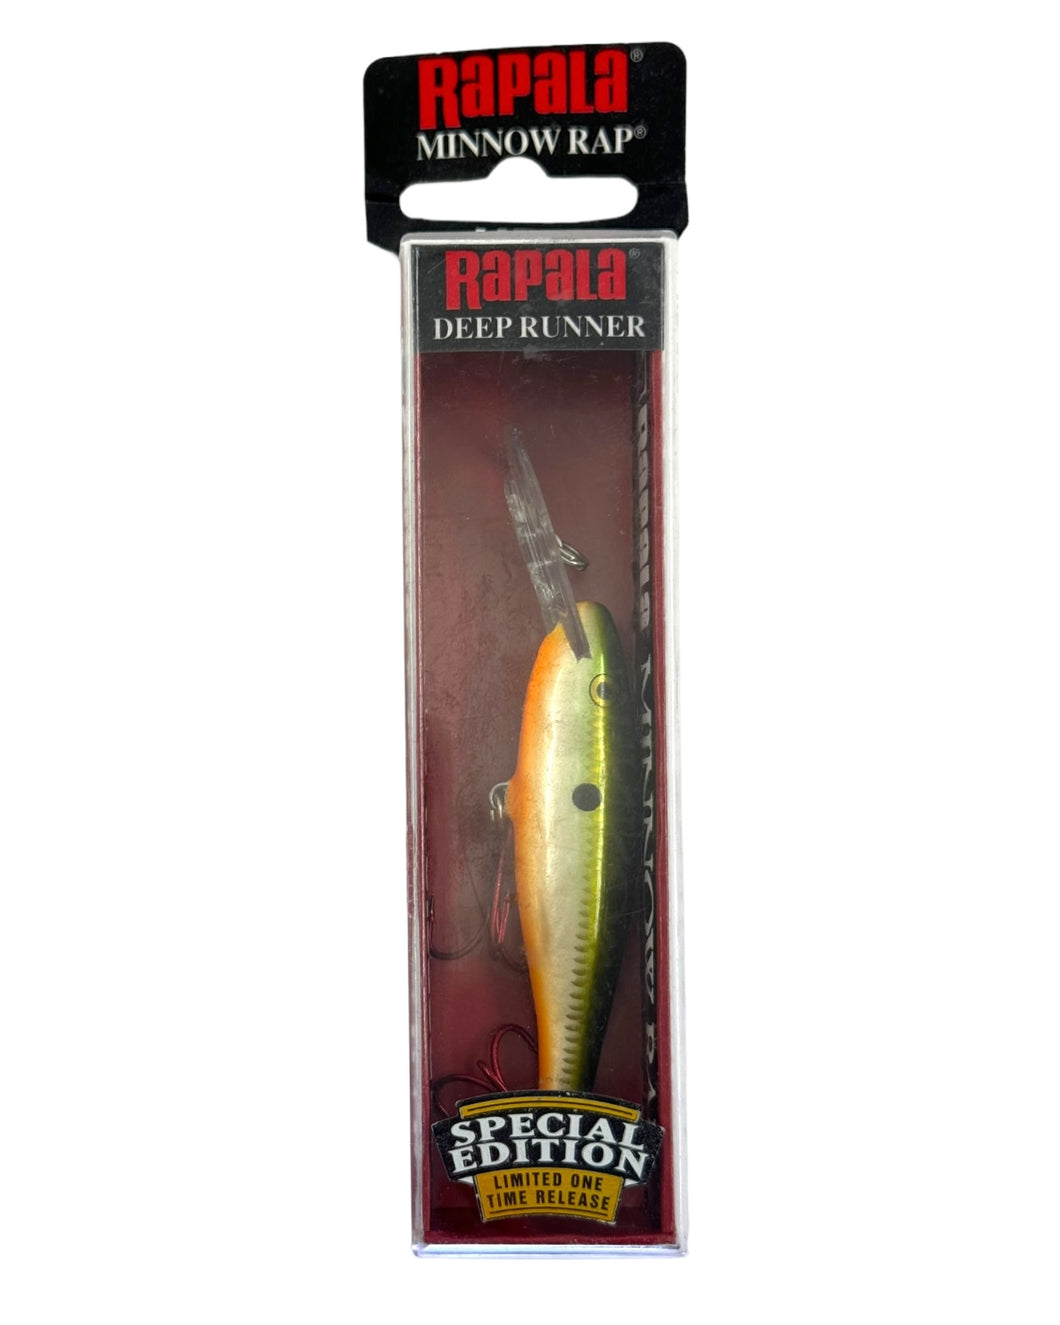 RAPALA LURES SPECIAL EDITION MINNOW RAP 7 Fishing Lure in TENNESSEE SHAD